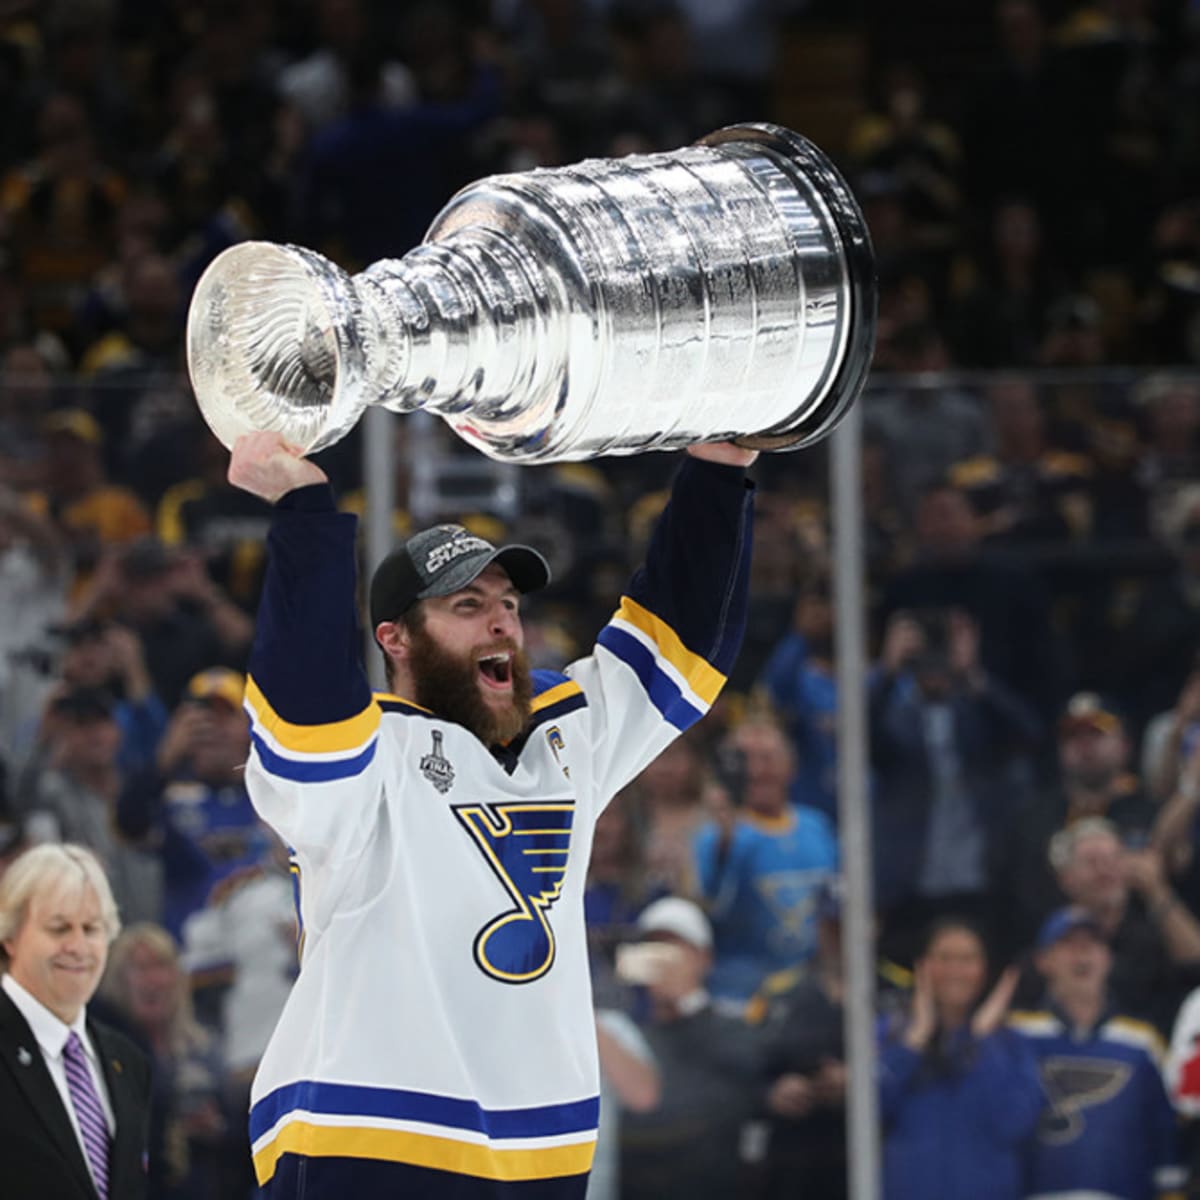 St. Louis Blues win first Stanley Cup in franchise history